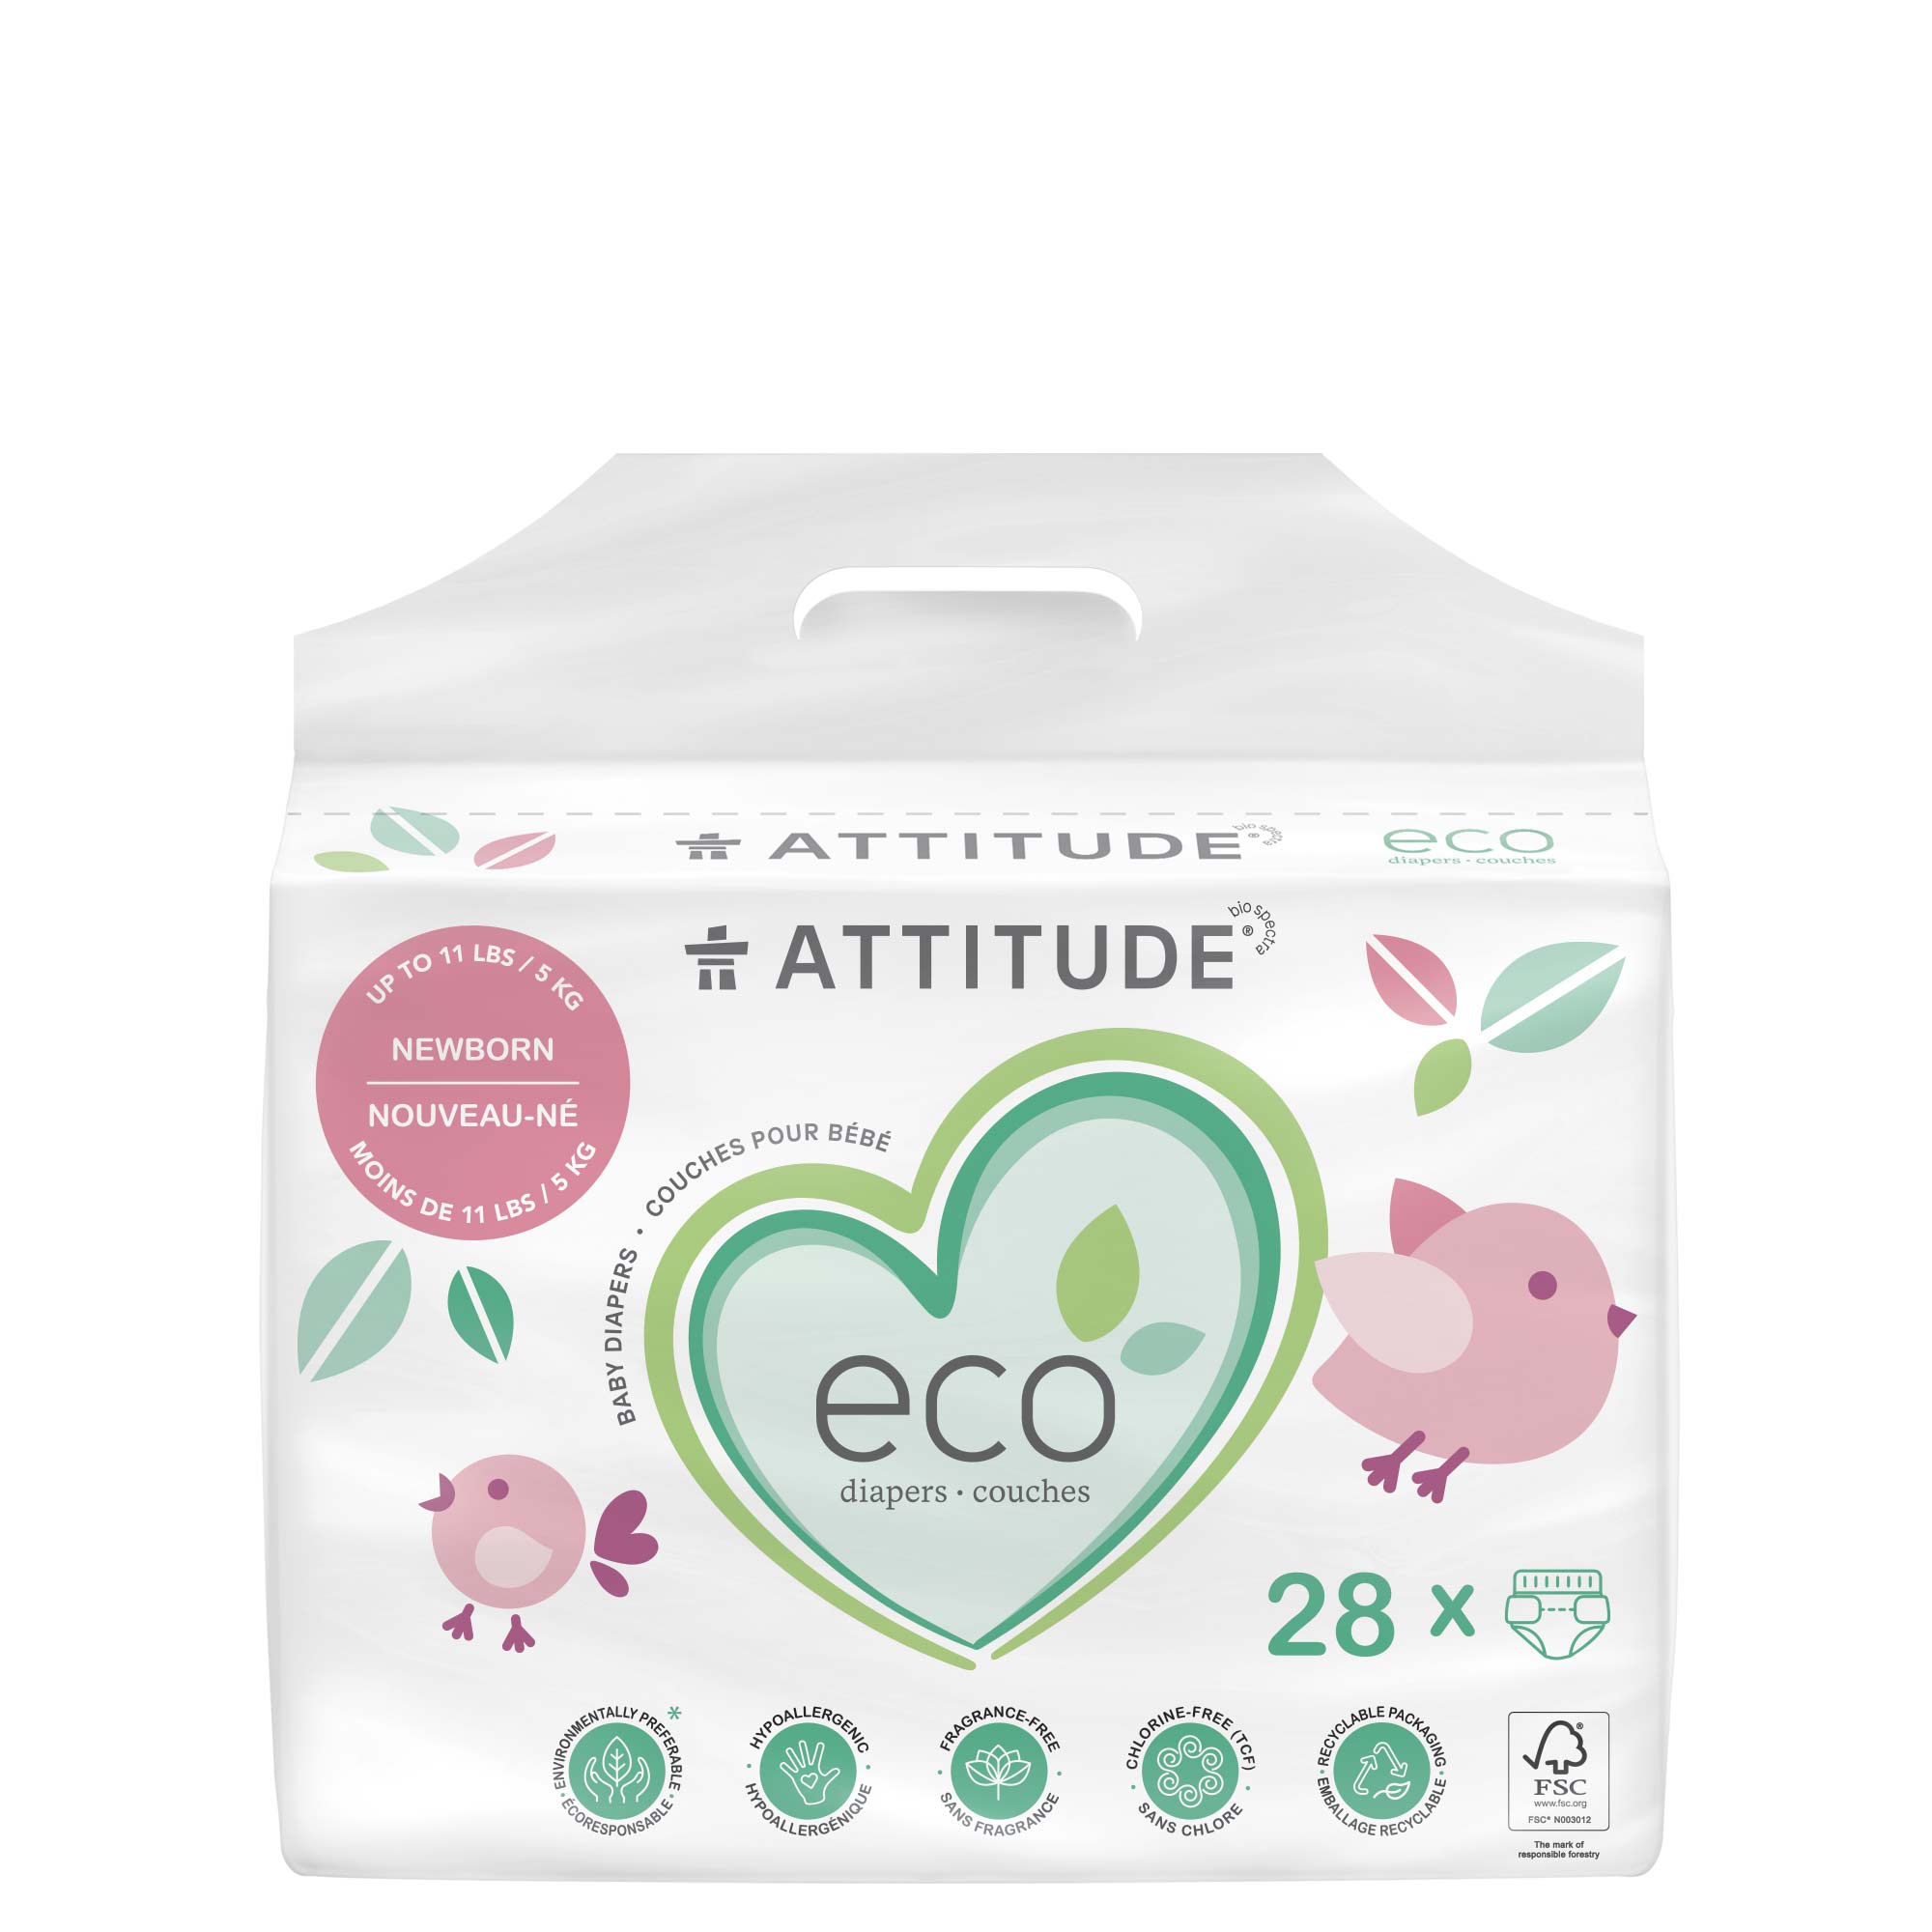 biodegradable-baby-diapers-eco-friendly-dermatologically-tested